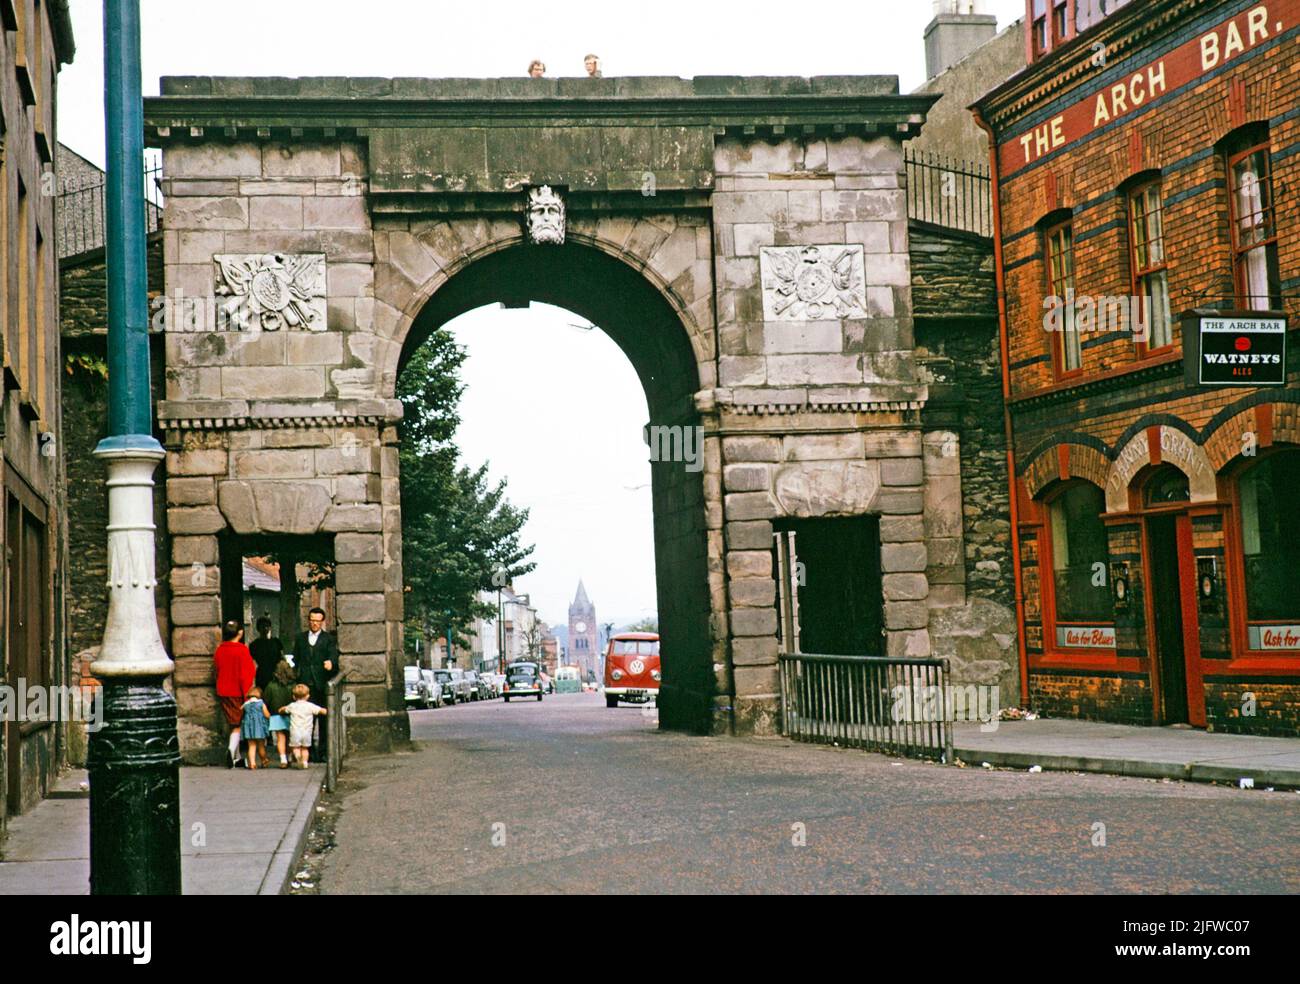 Bishop's Gate part of the old city walls built 1789, and The Arch Bar pub, Derry Londonderry, Northern Ireland, UK 1960s Stock Photo